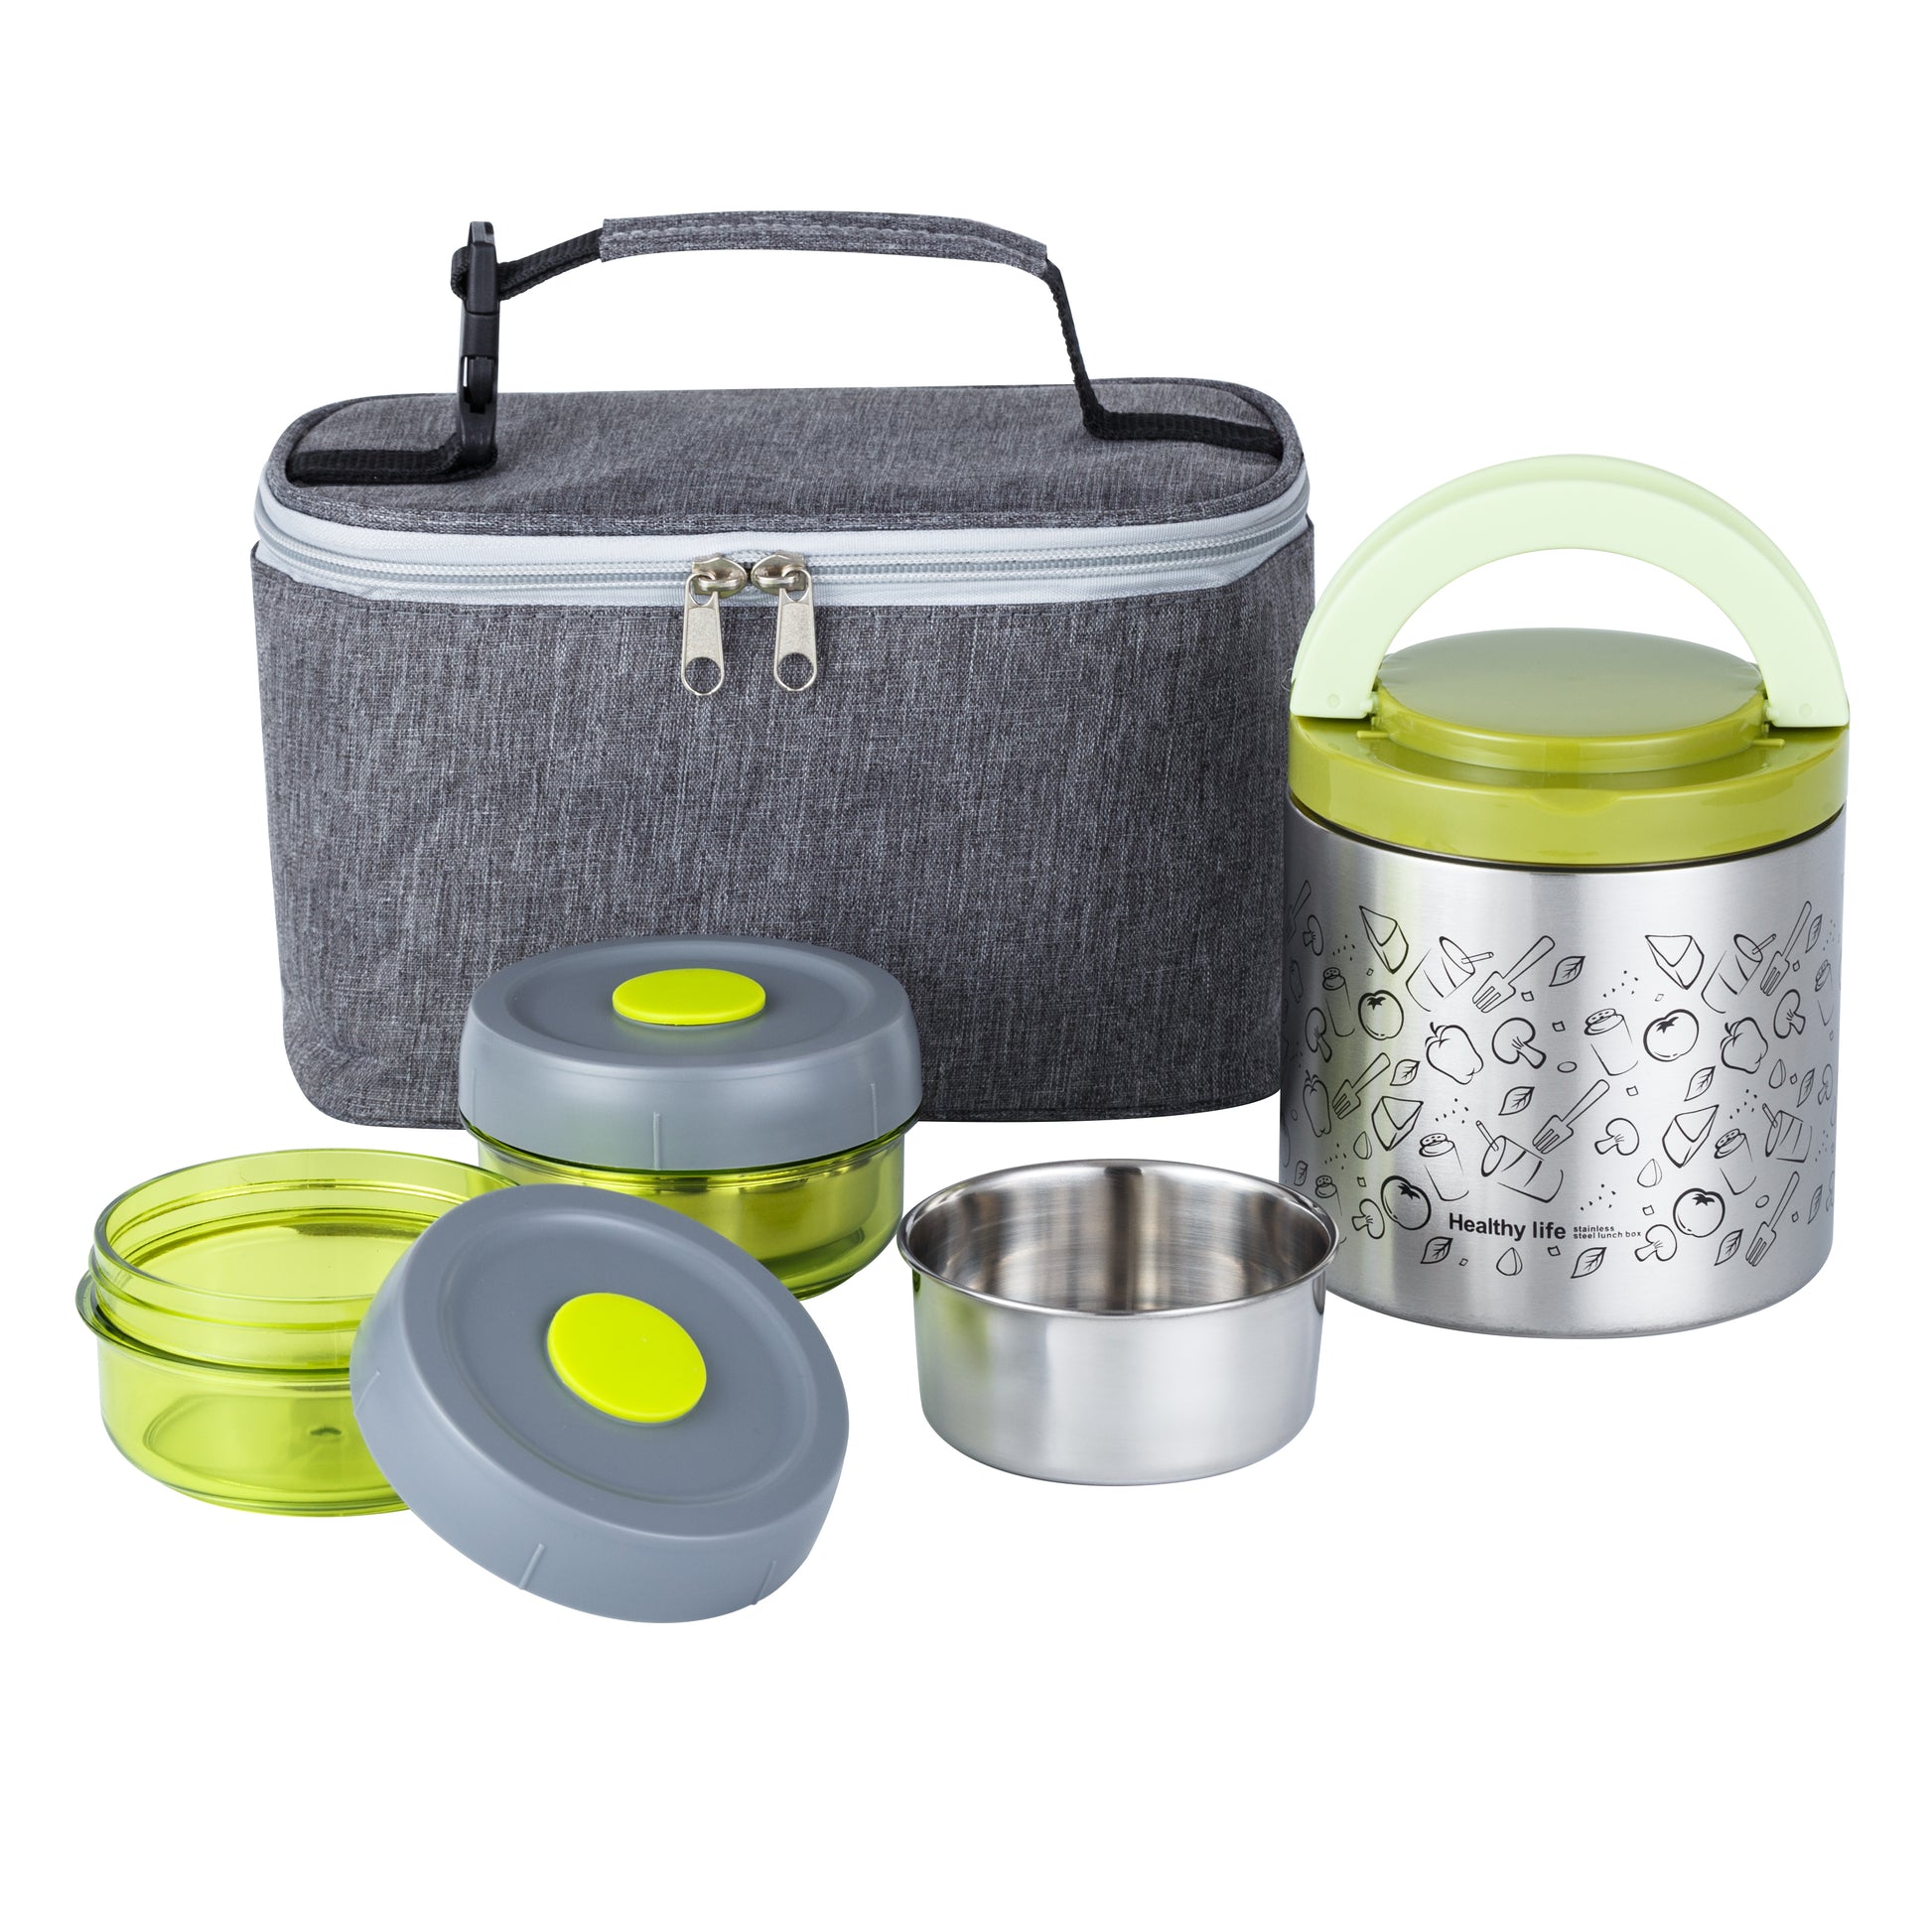  Lille Home Lunch Box Set, A Vacuum Insulated Bento/Snack Box  Keeping Food Warm for 4-6 Hours, Two Stainless Steel Food Containers, A  Lunch Bag, A Portable Cutlery Set (Blue): Home 